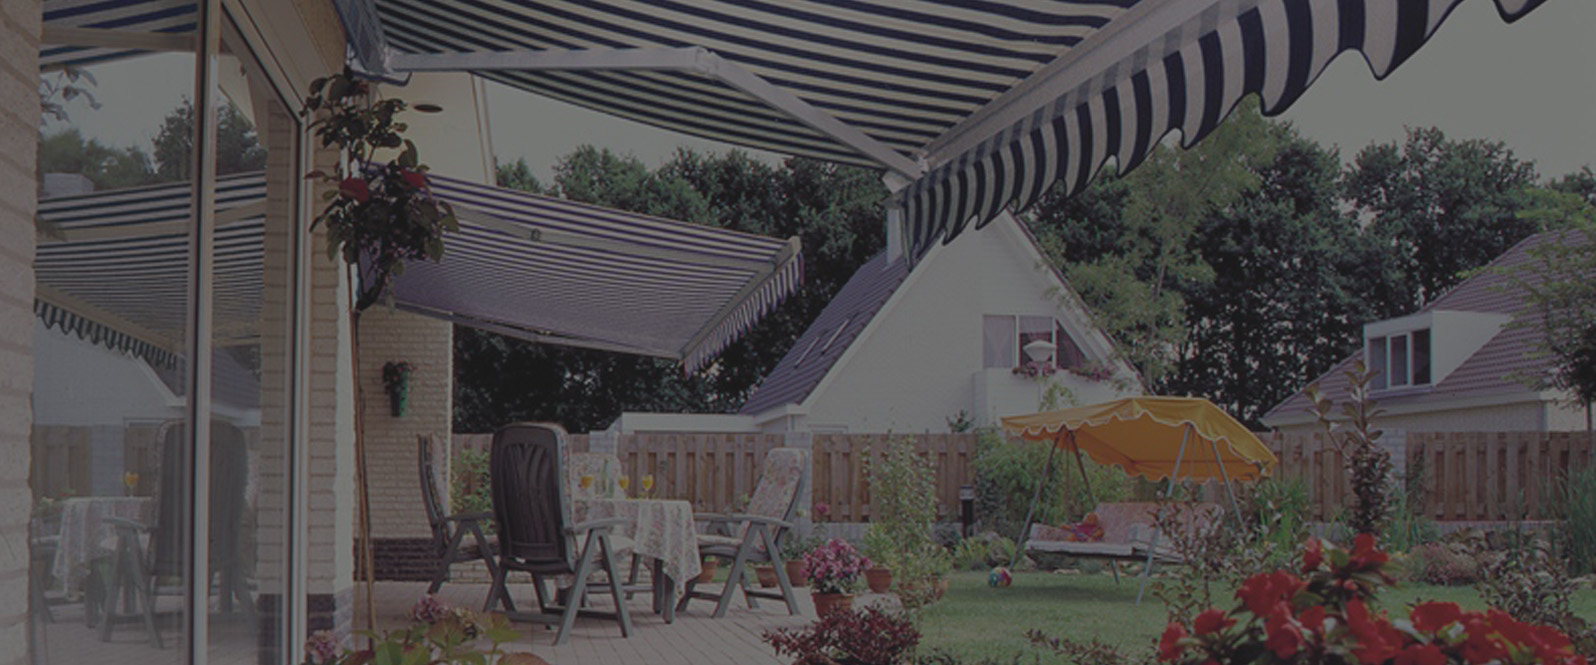 Blue and white striped electrically operated awning in a Norfolk garden